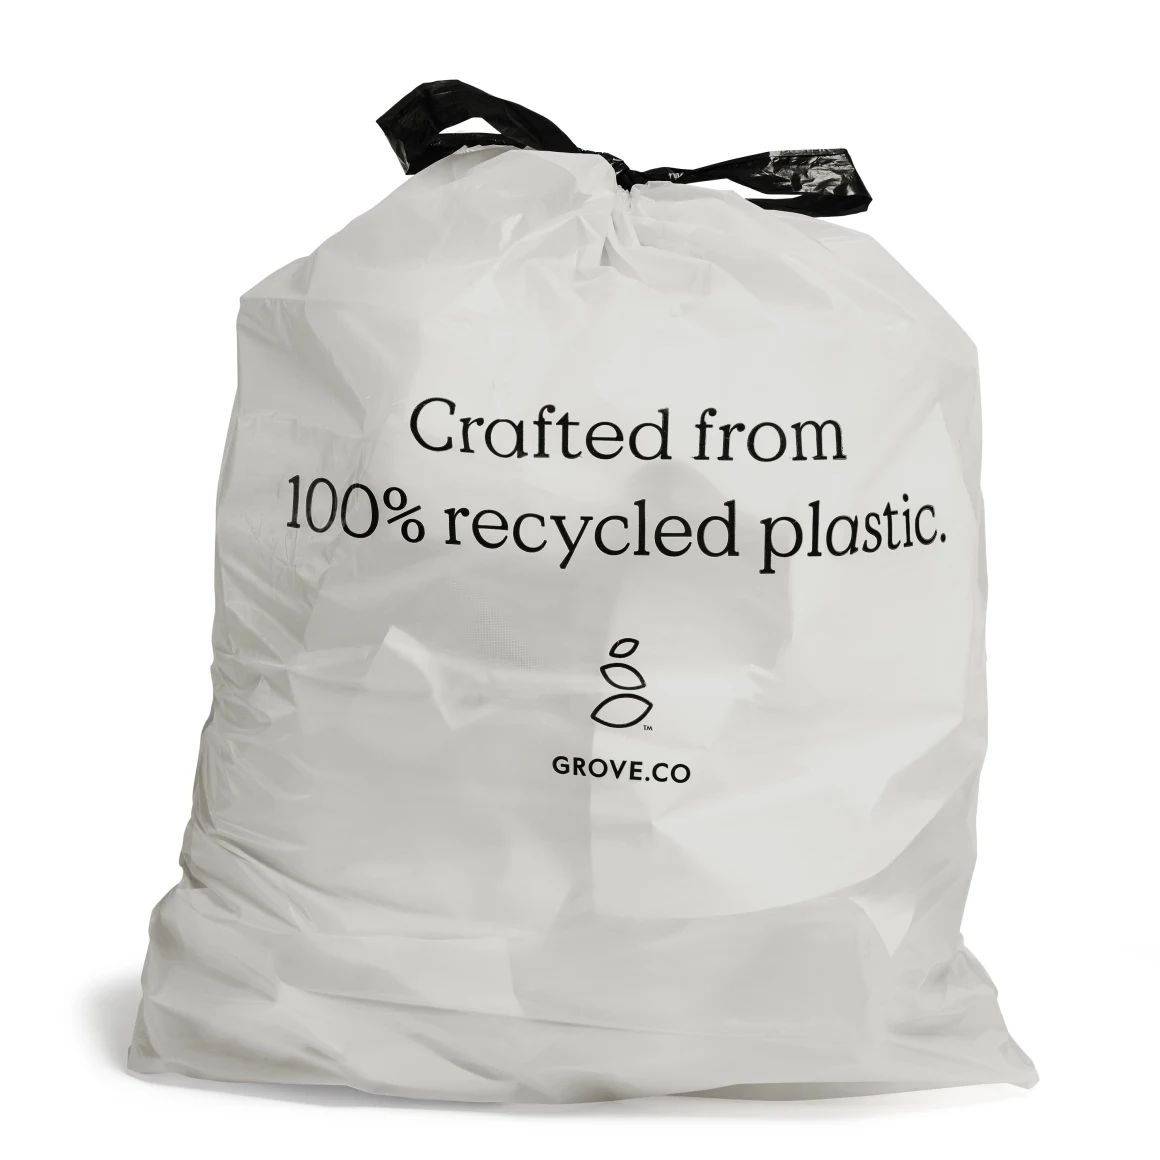 Grove Co. 100% Recycled Plastic Trash Bags - Drawstring Top | Grove